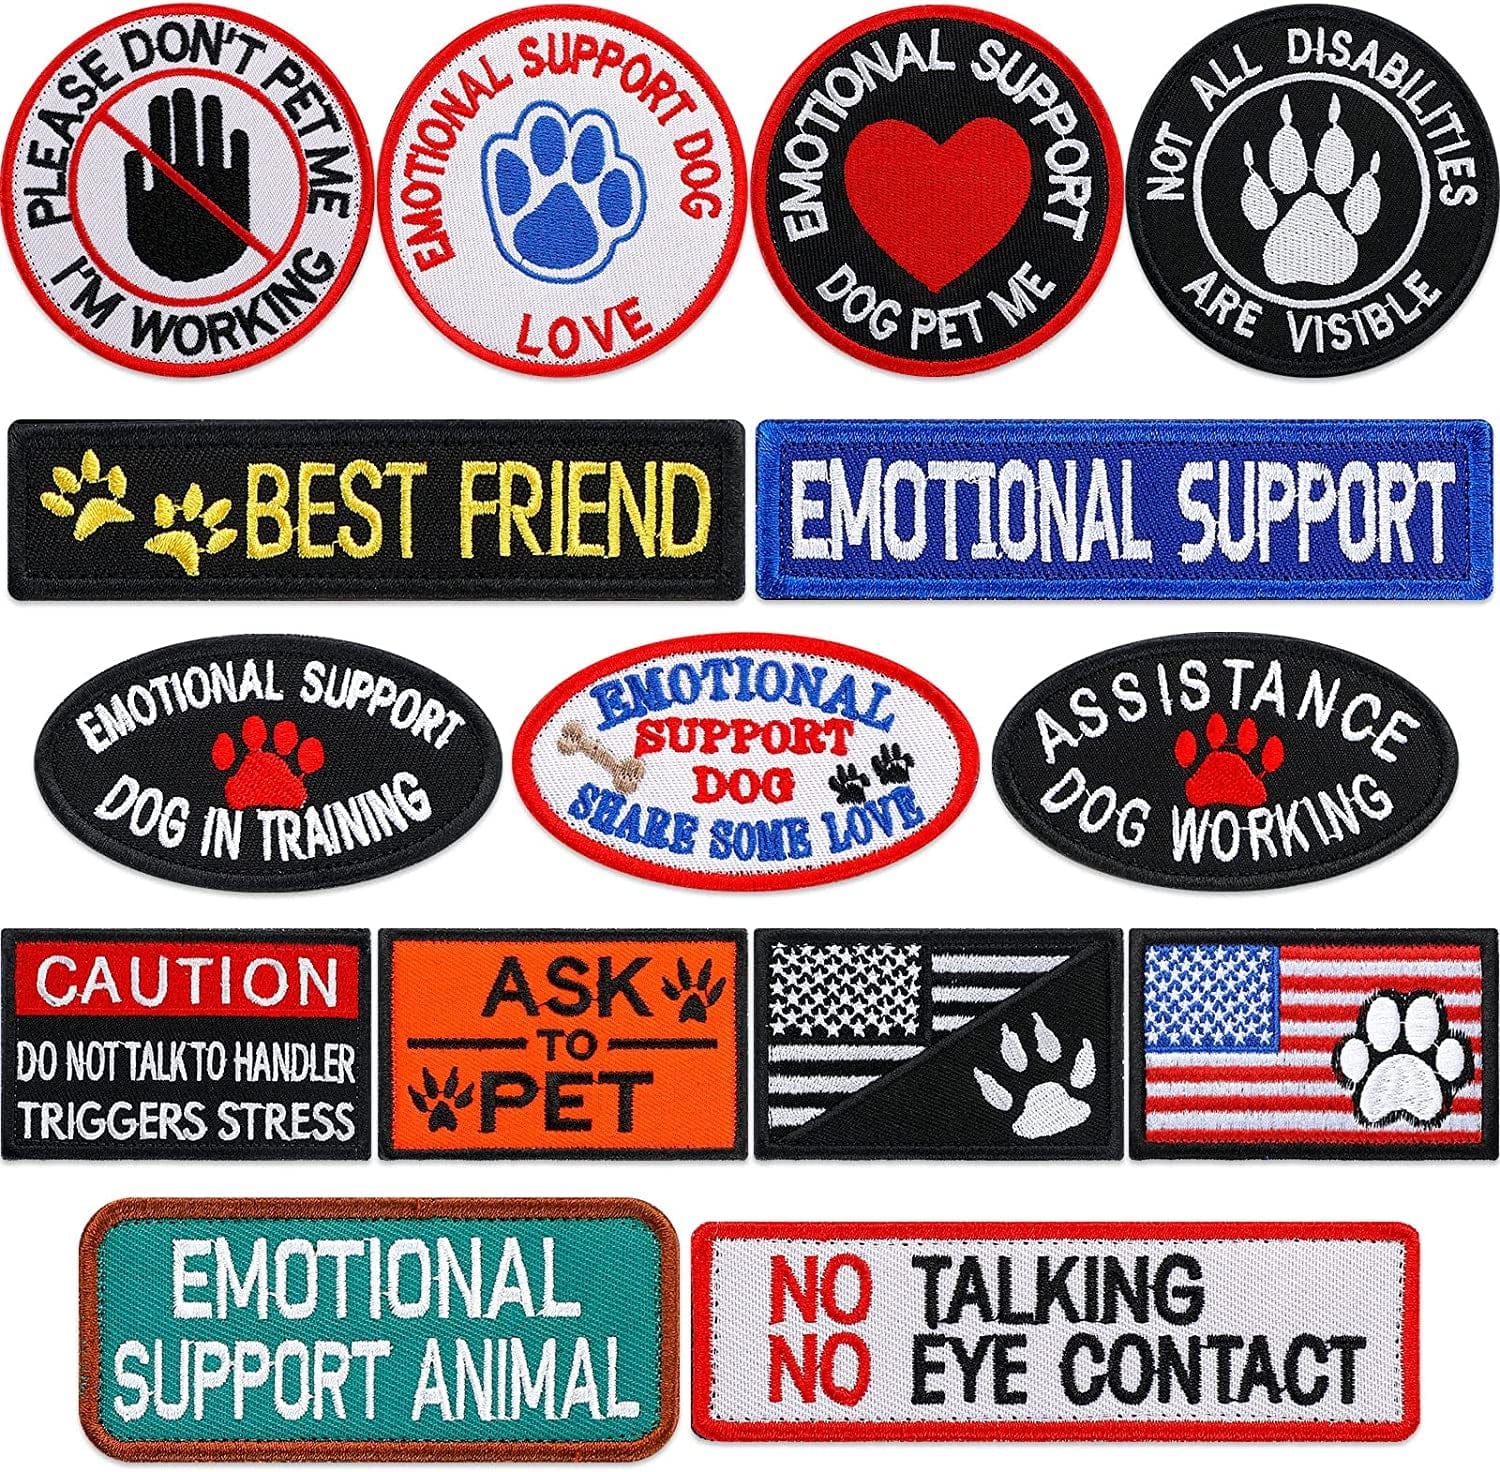  12 Pack in Training Service Dog Patches for Vest, 8 Embroidered  Designs for Support Animal Harness, Do Not Pet Signs : Pet Supplies